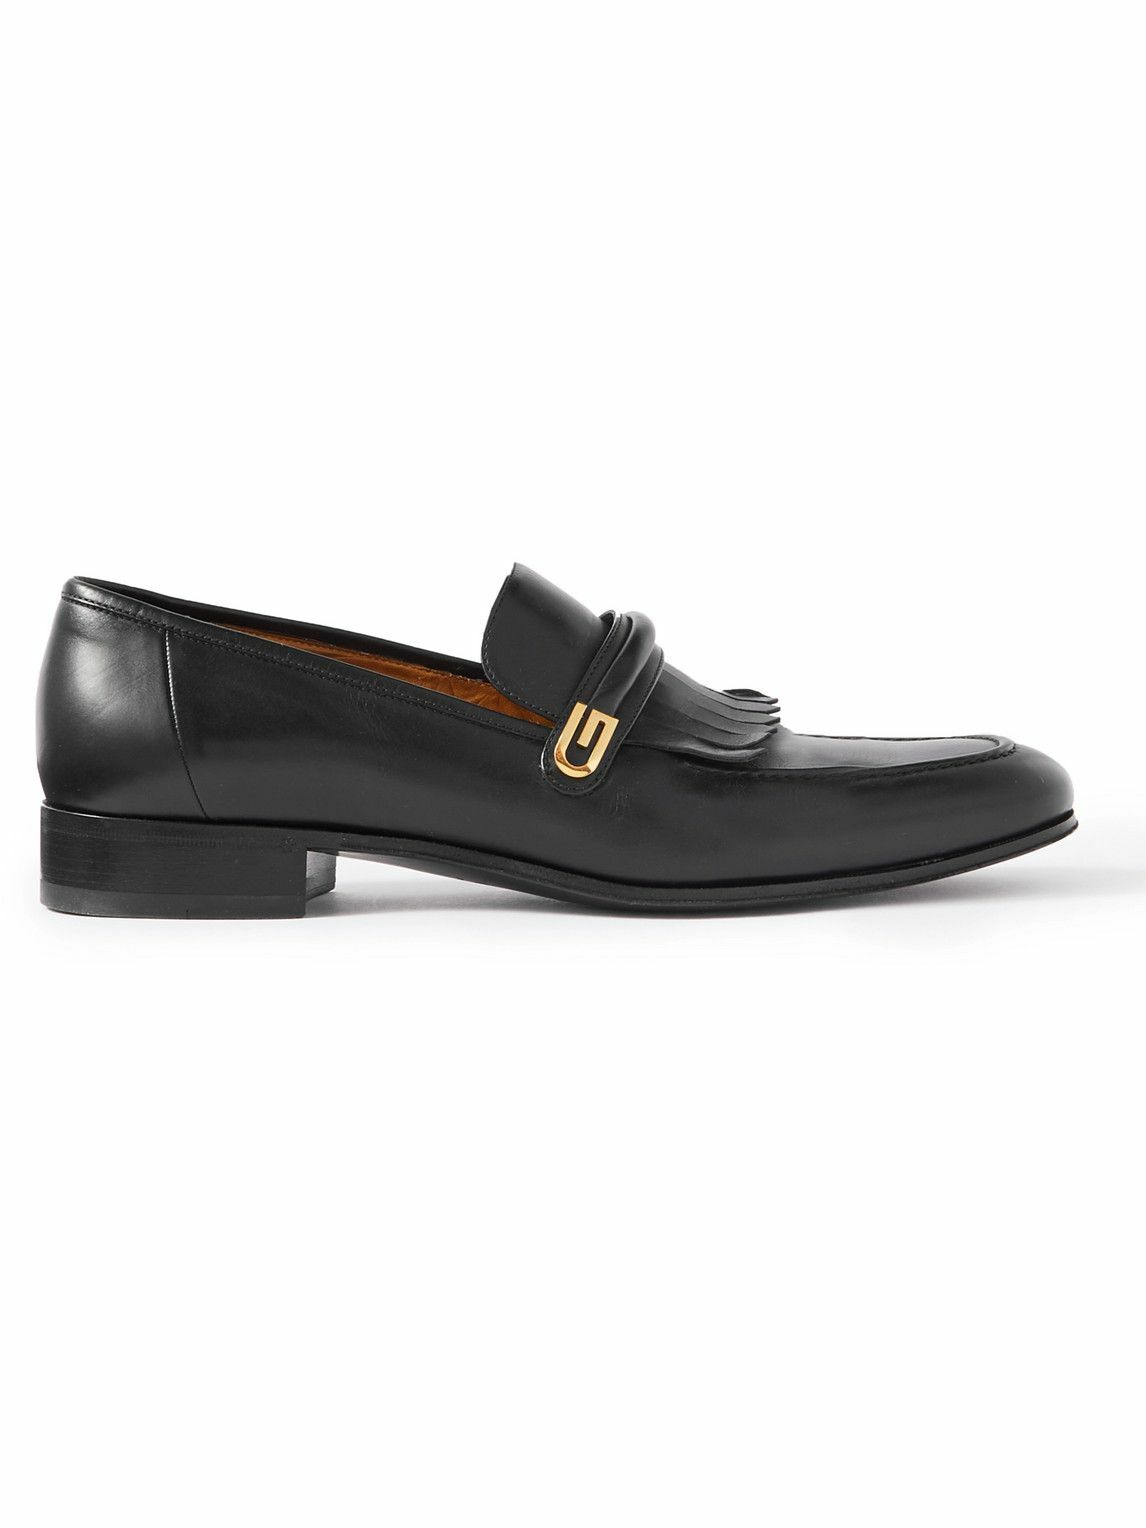 GUCCI - Fringed Leather Loafers - Black Gucci